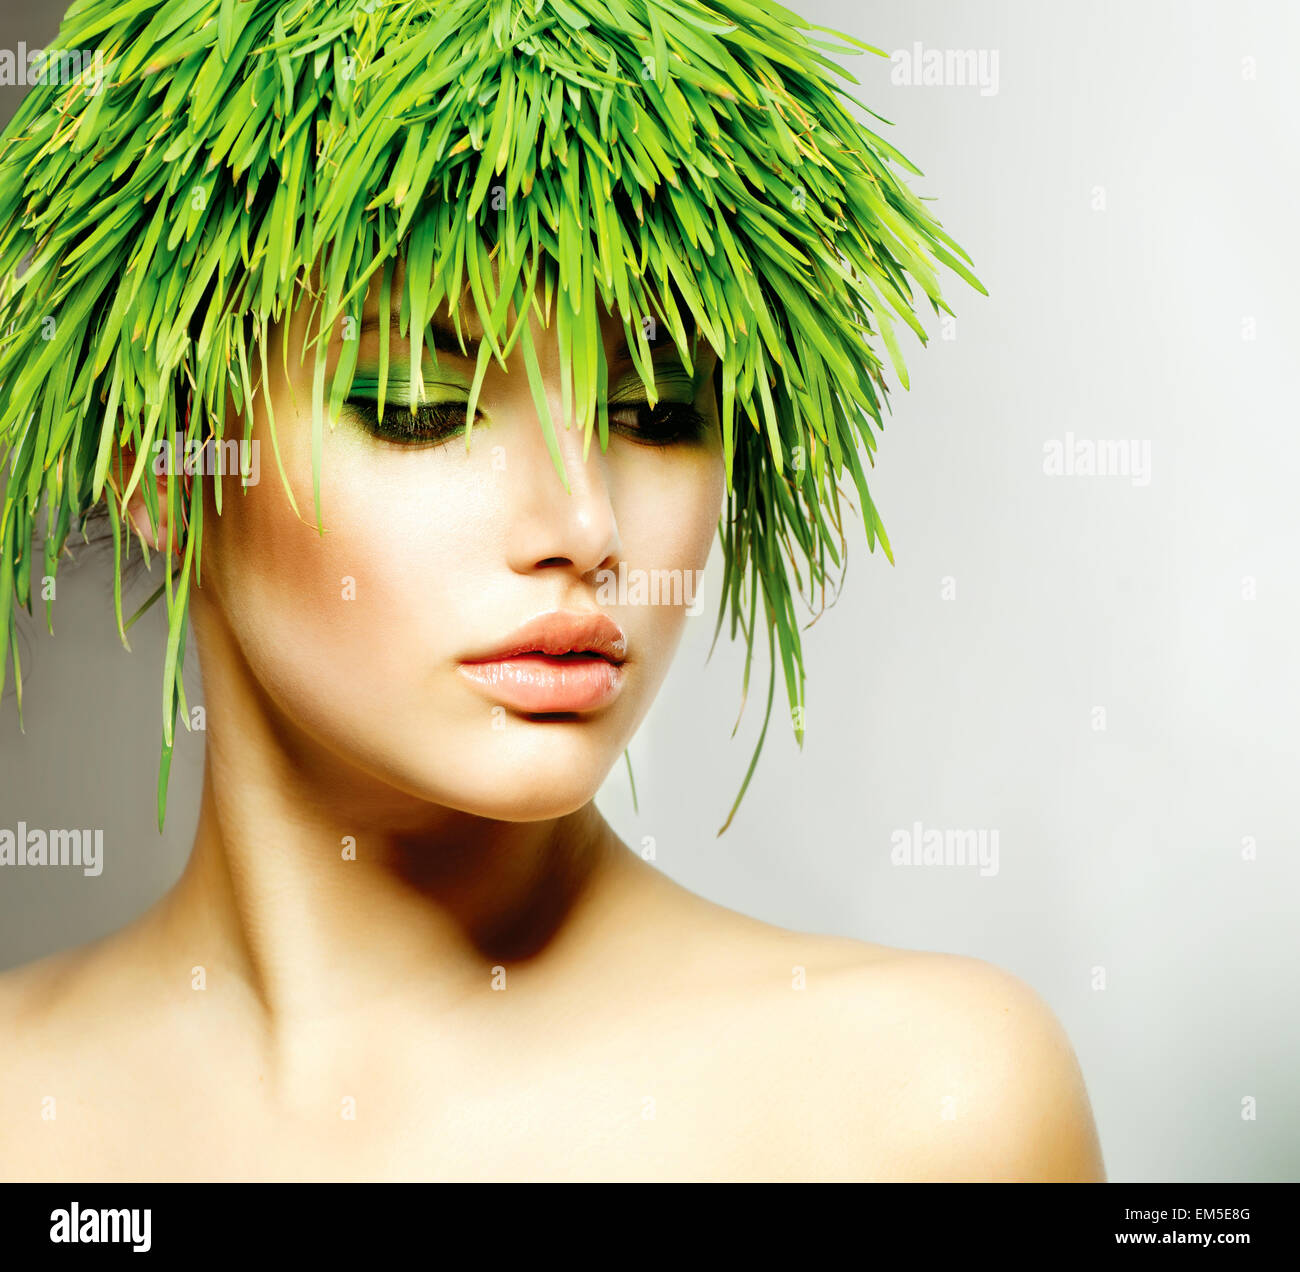 Beauty Spring Woman with Fresh Green Grass Hair Stock Photo